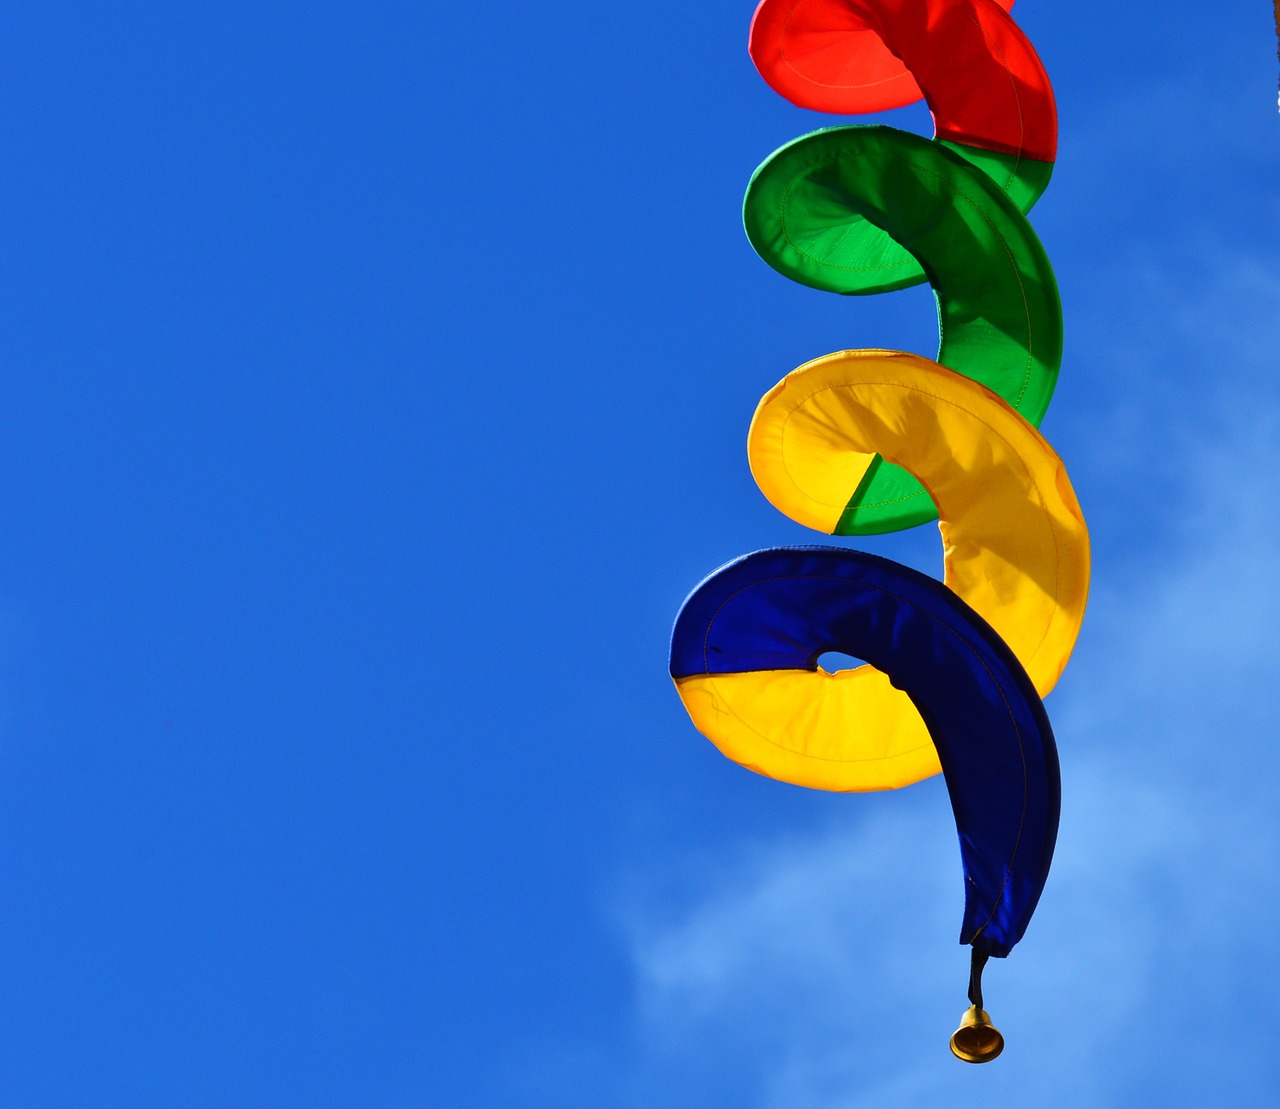 windspiel colorful spiral free photo